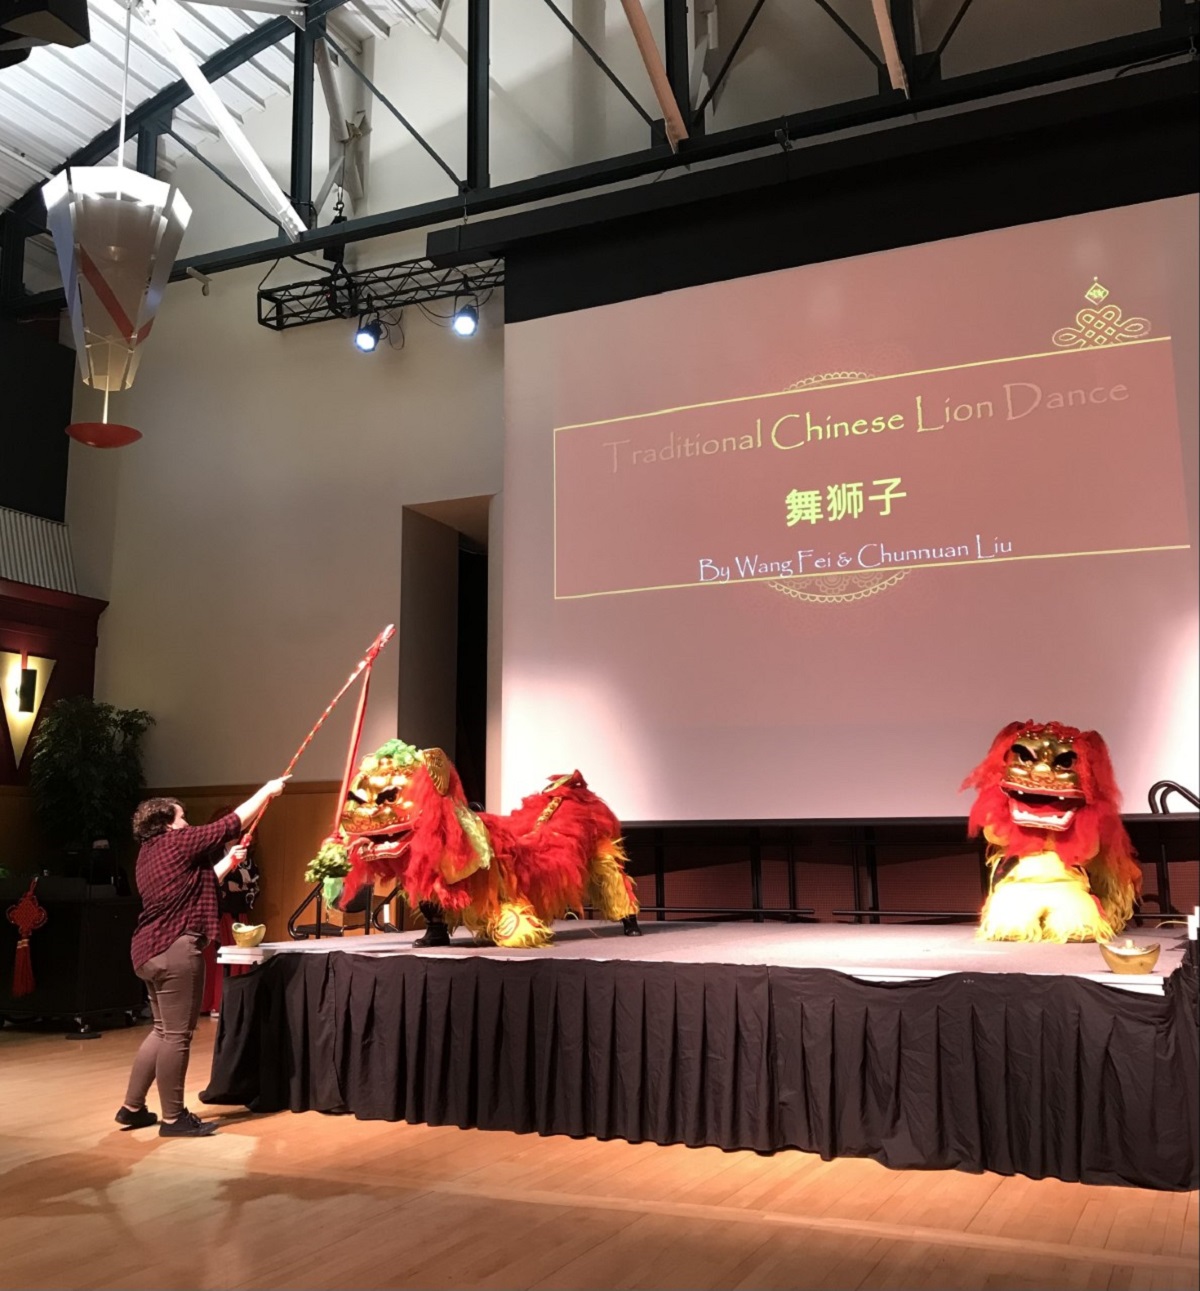 Female presenter pointing with a large stick toward a projection screen with a slide that says "Traditional Chinese lion dance" in English and Chinese 